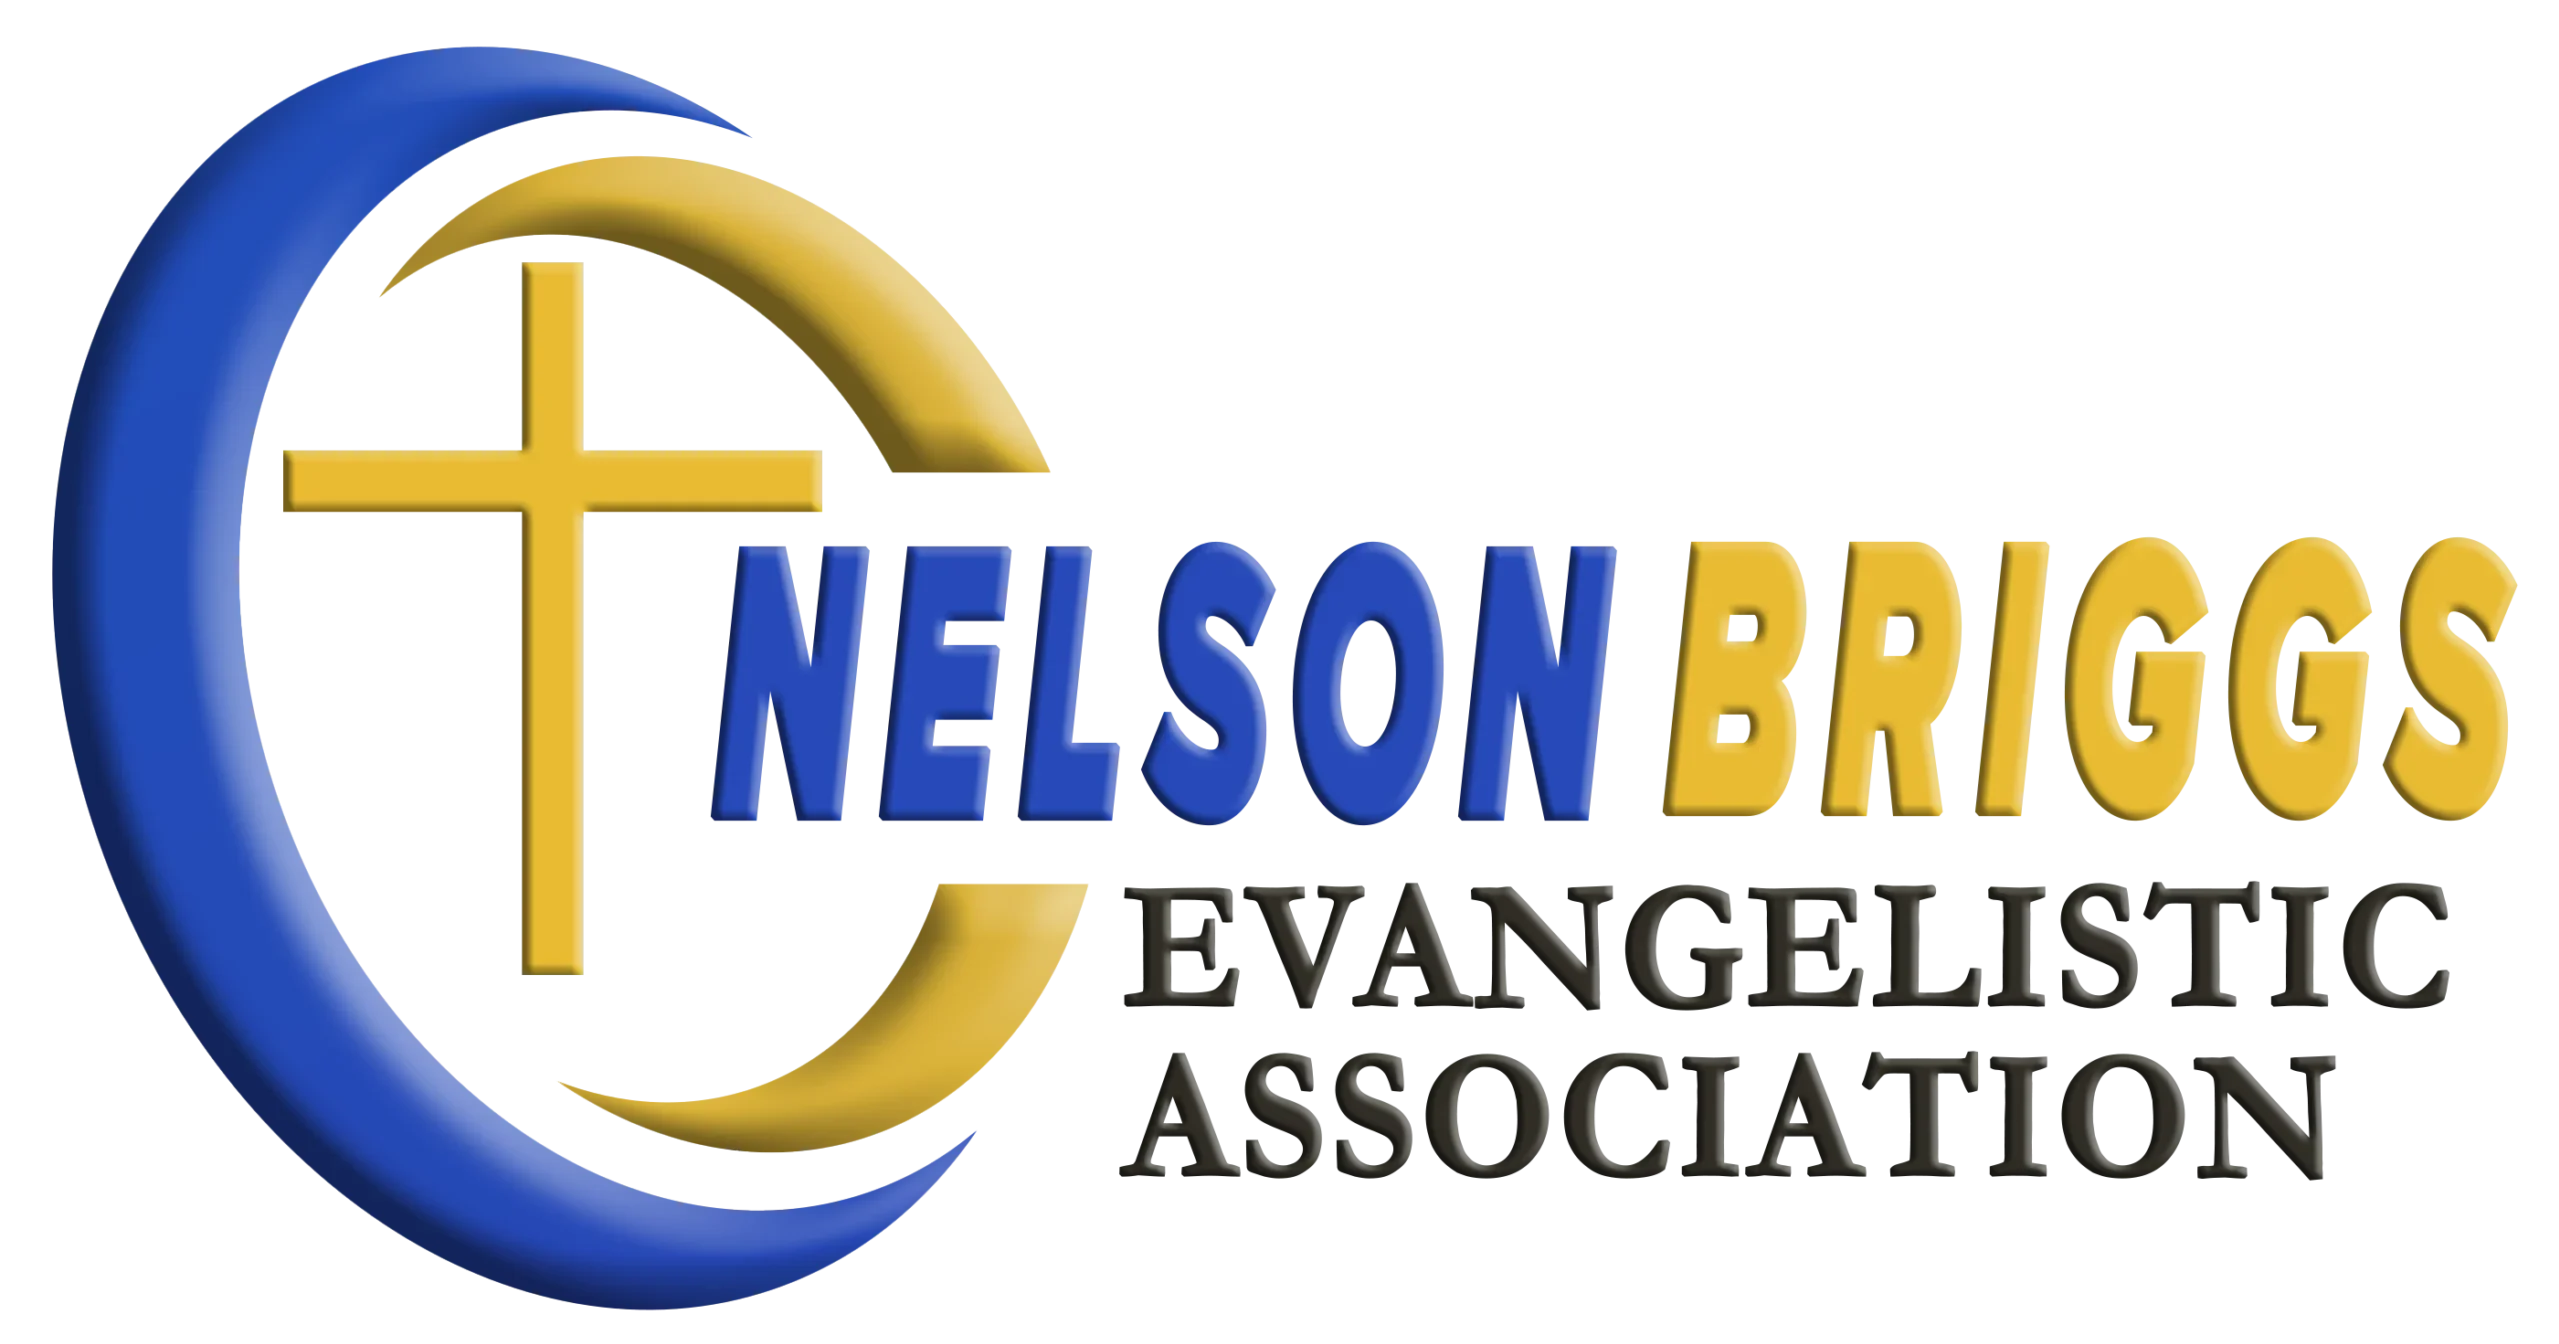 Nelson at Nelson Briggs Evangelistic Association, visit us at nelsonbriggs.com